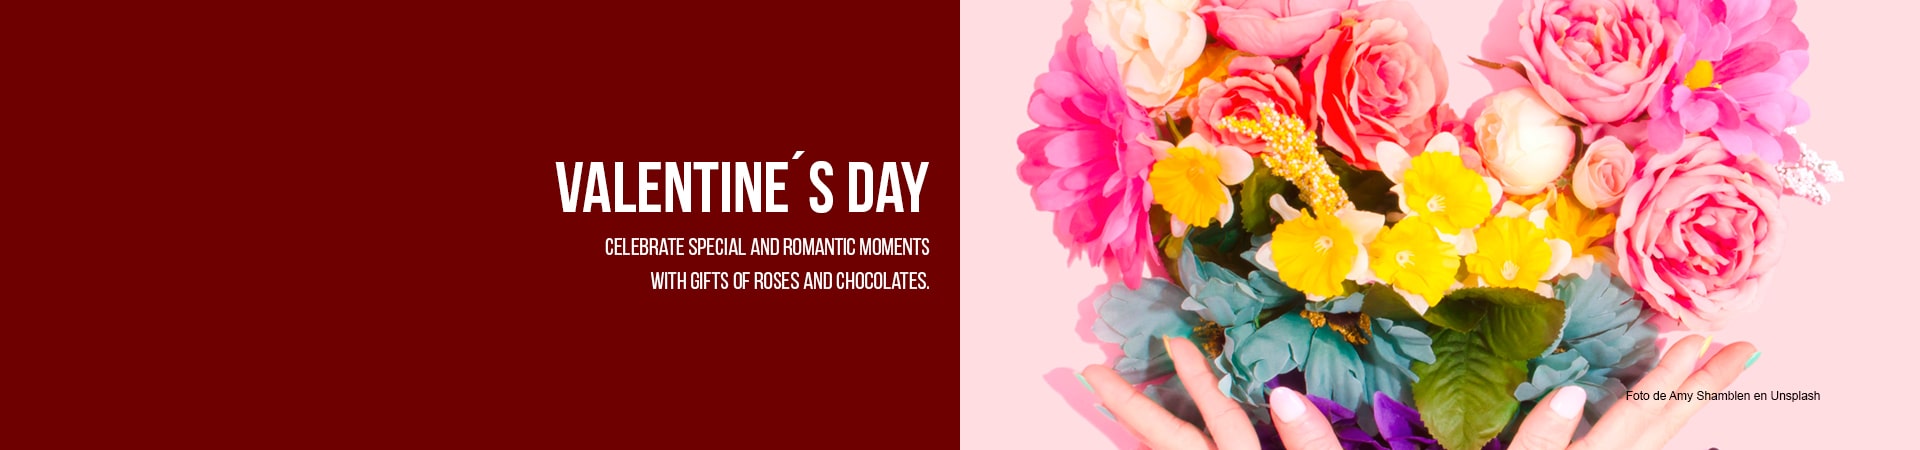 Give the gift of roses and flowers on Valentine's Day, we are florists, Fresh Flowers Orlando, delivering your gift of roses and special Valentine's Day flowers to your doorstep, our local florists in Orlando, FL will deliver your Valentine's Day